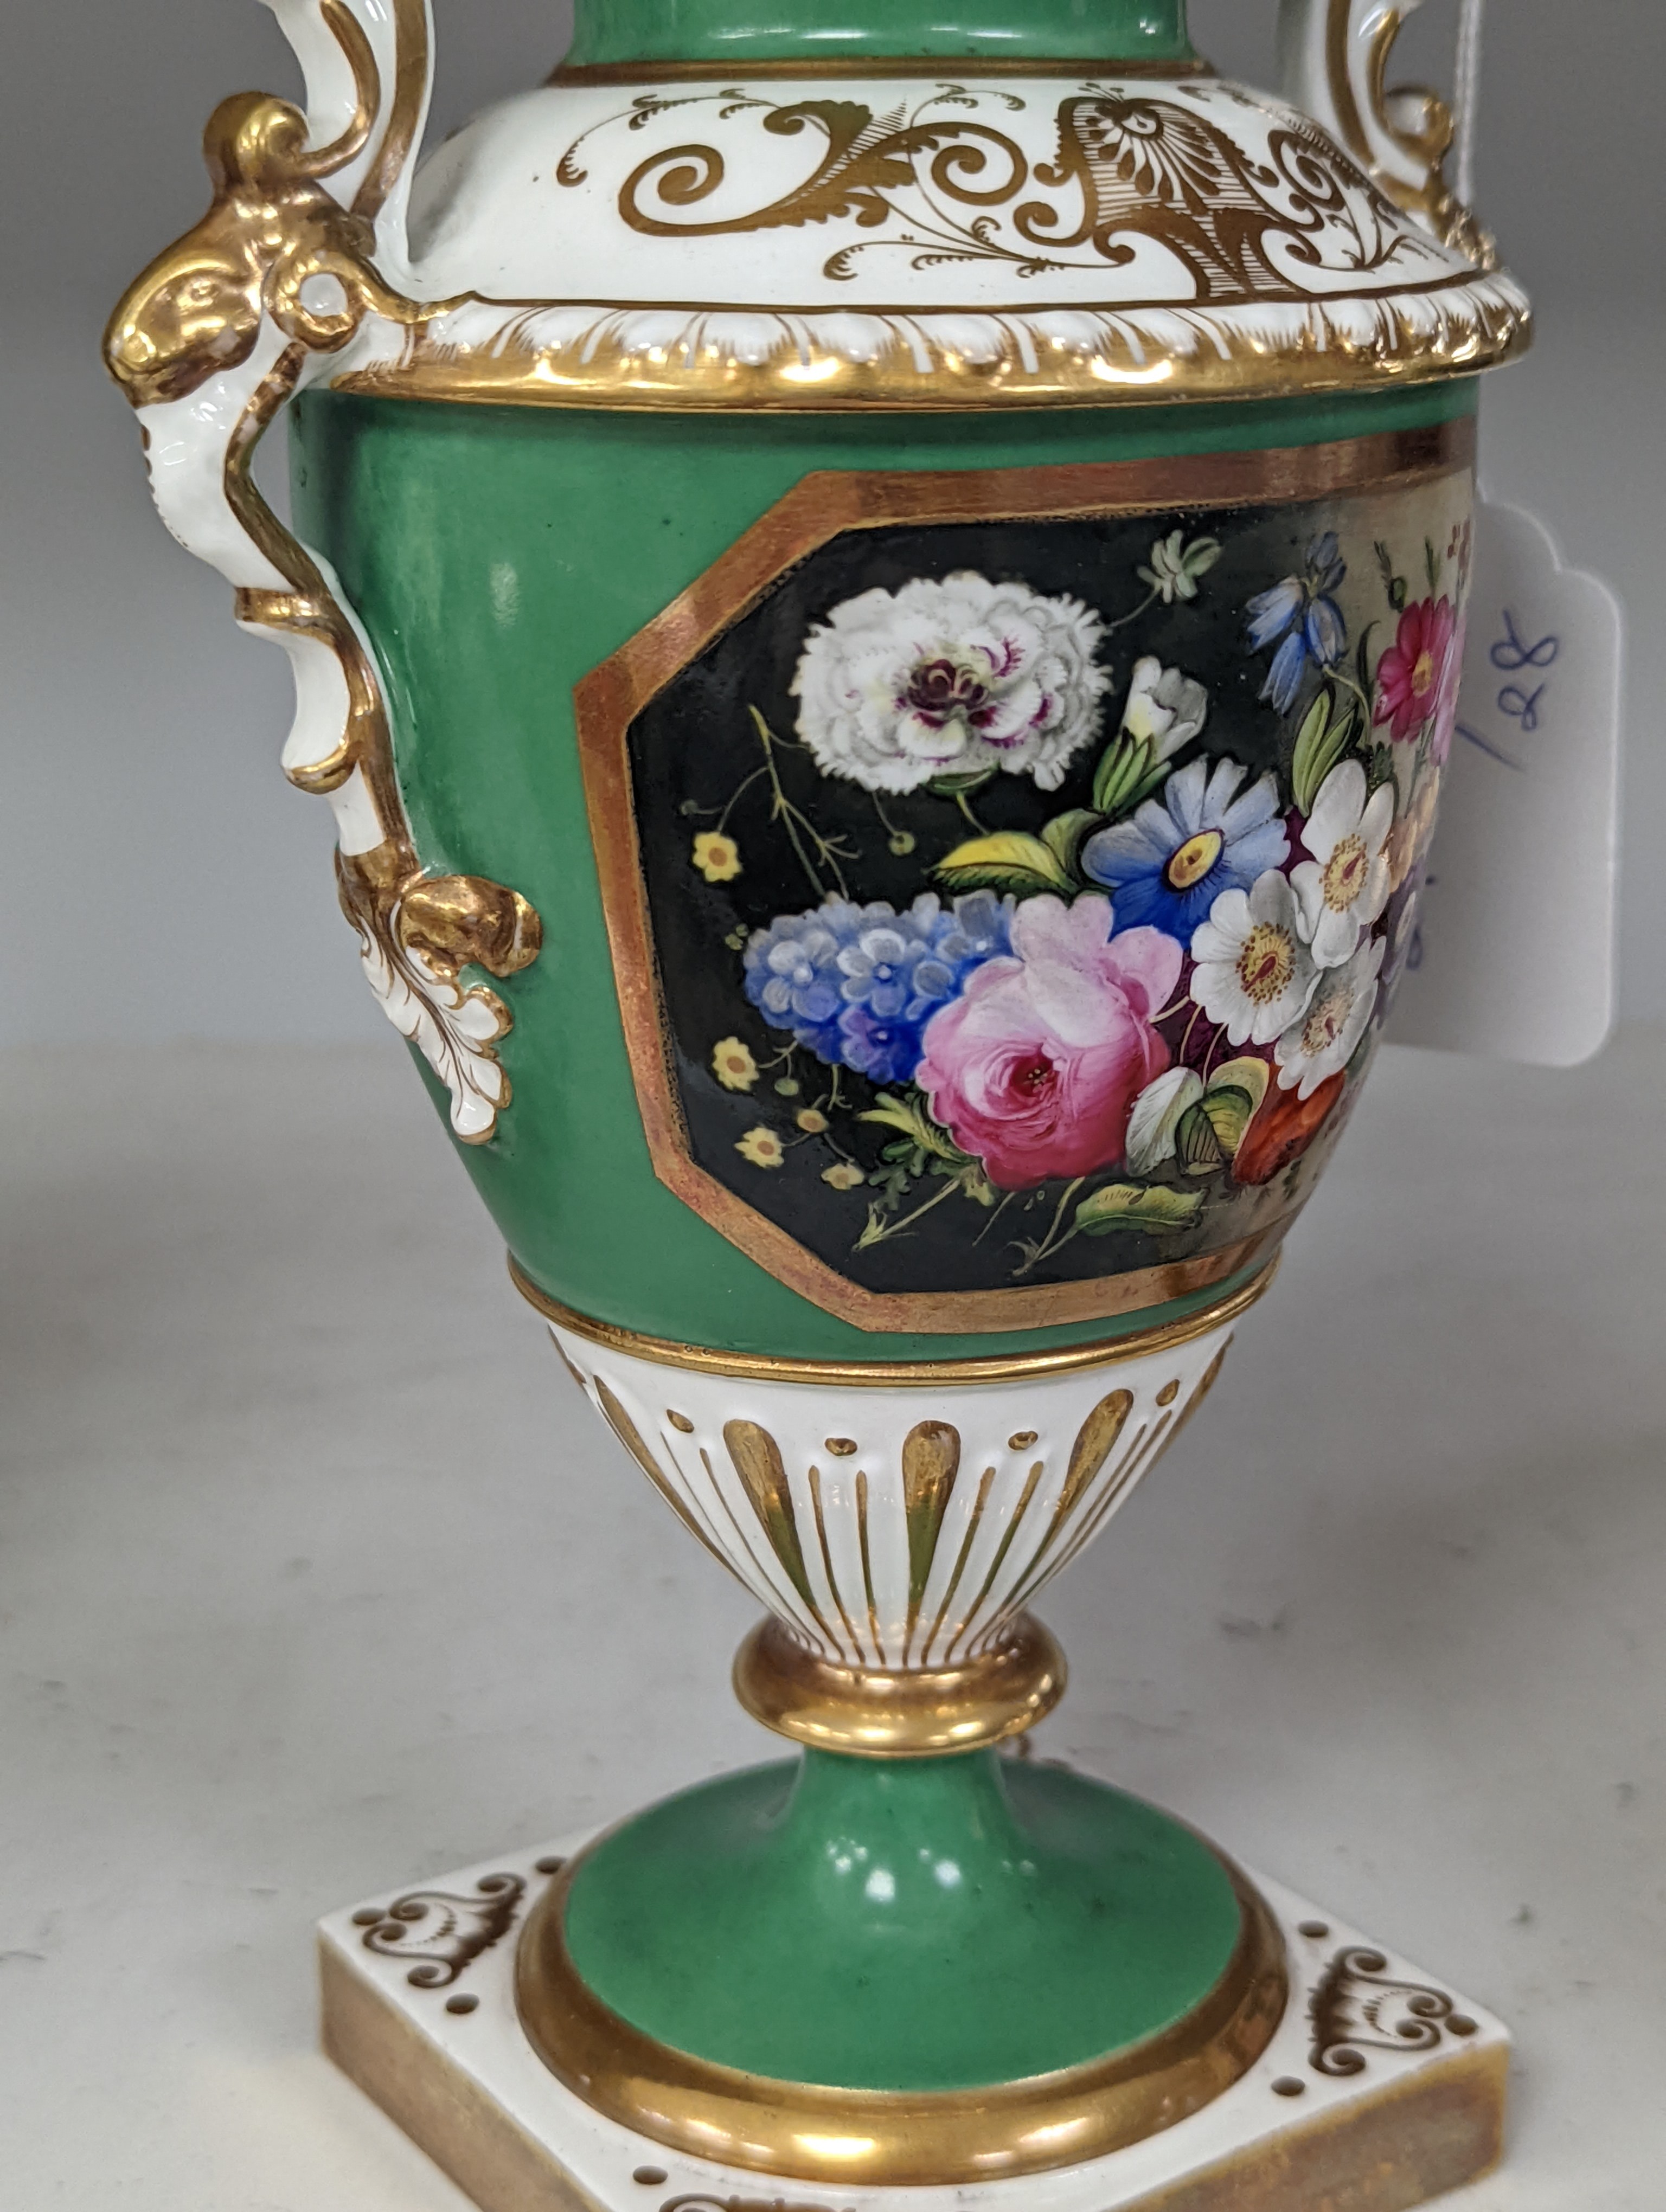 An English porcelain two handled vase painted with flowers in a panel on a green ground, probably Grainger Worcester, c.1830, height 24cm